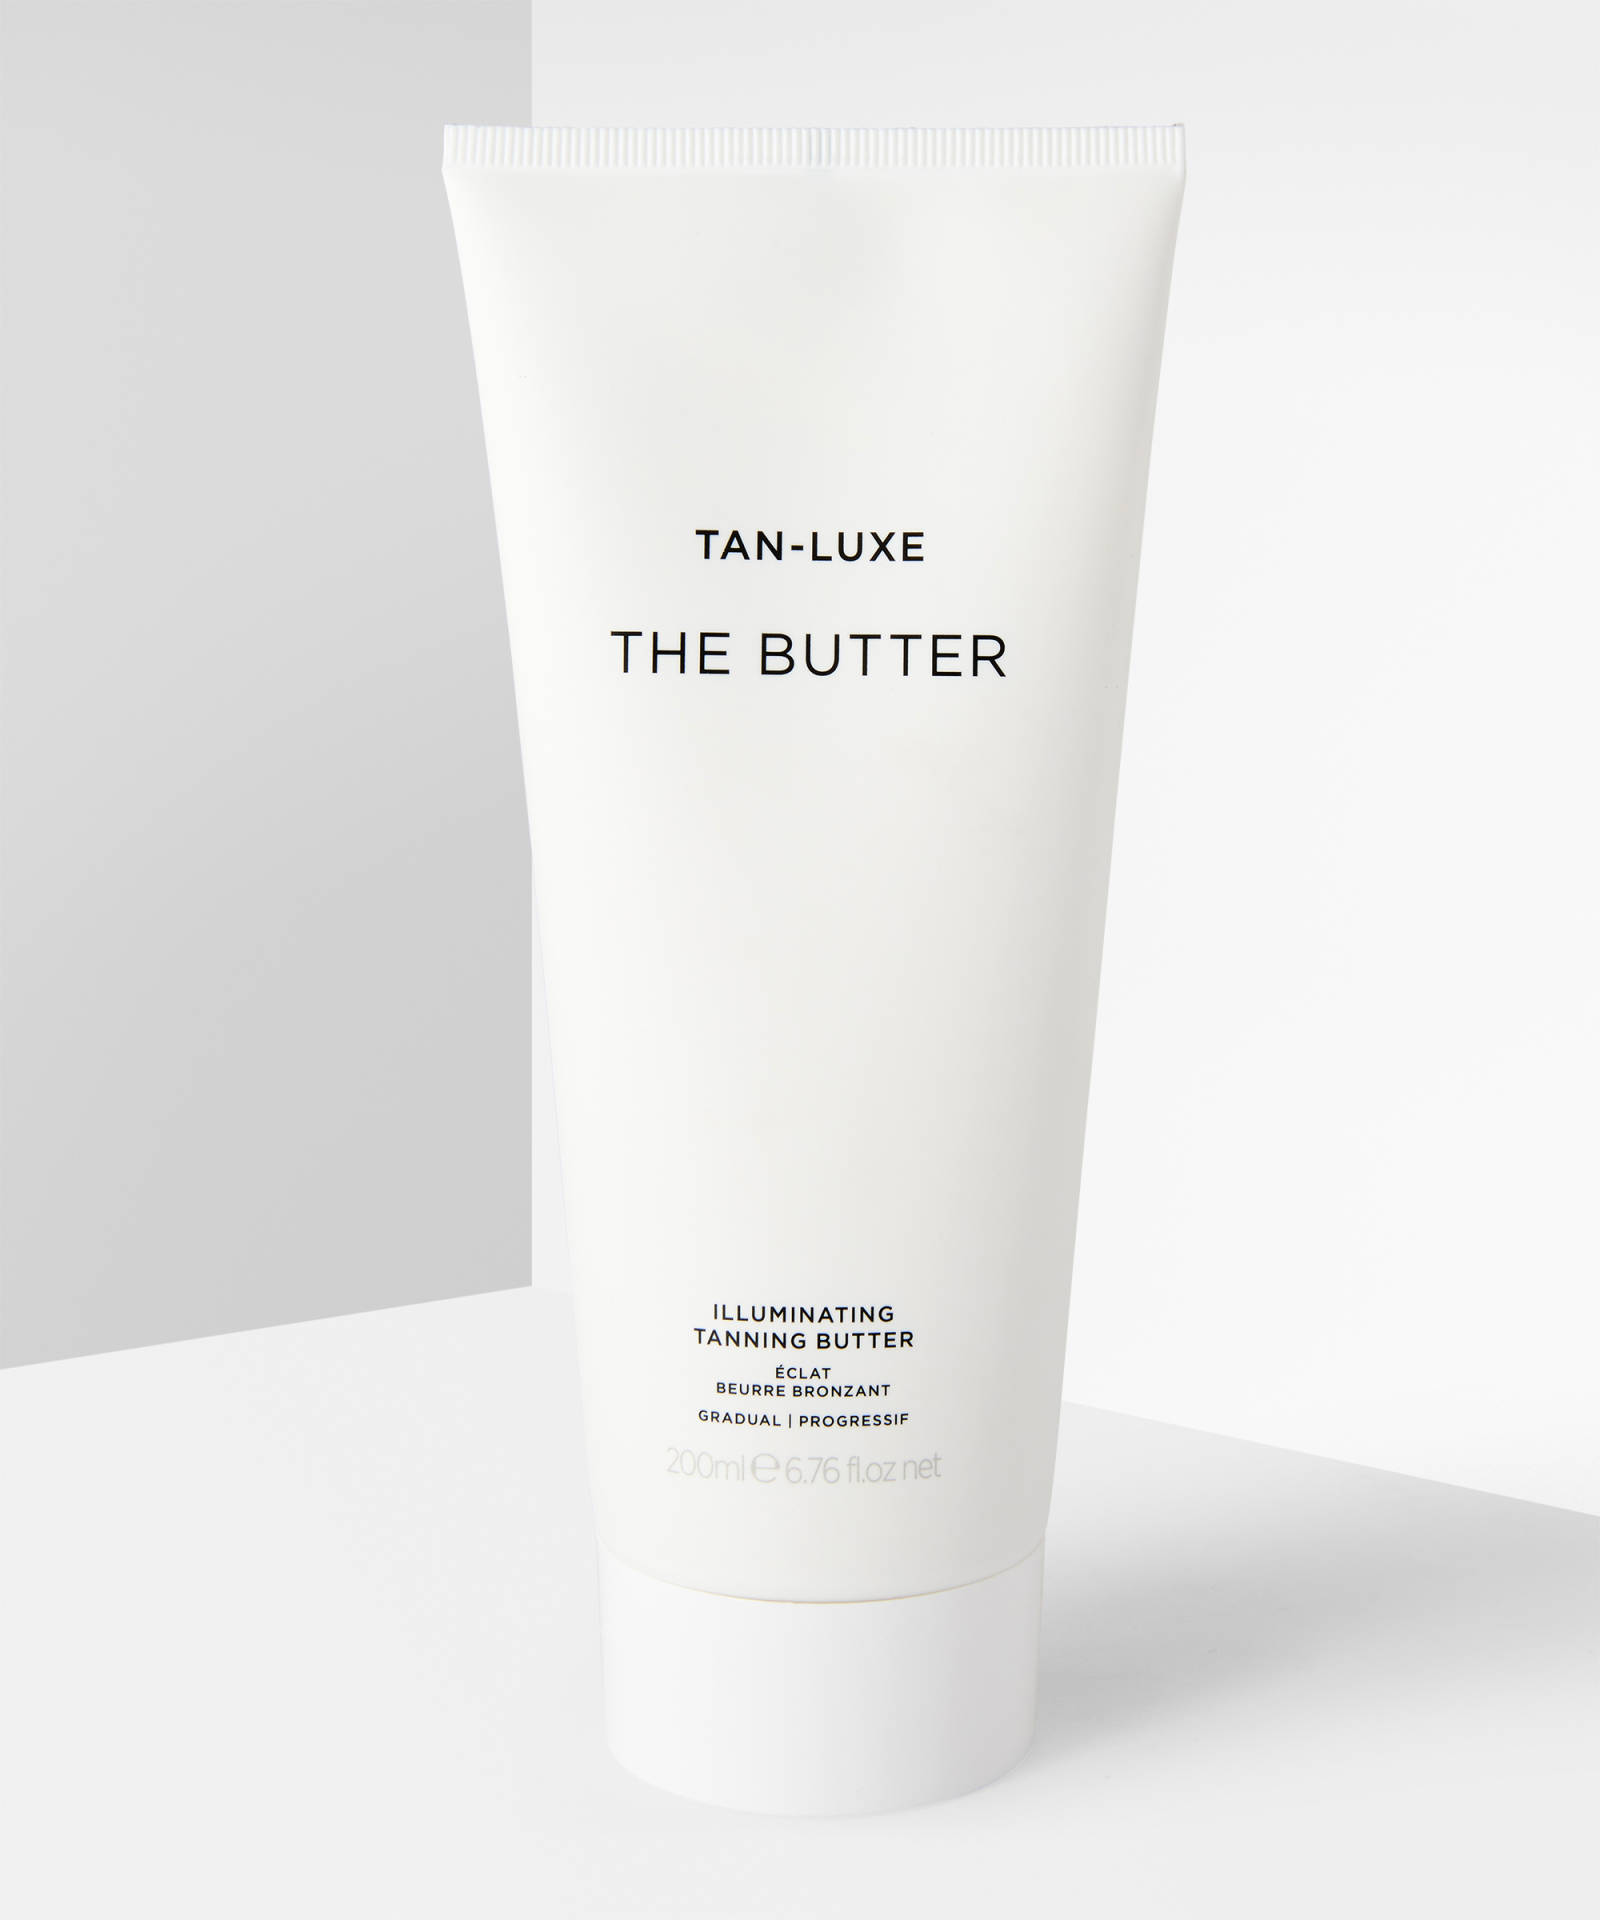 THE BUTTER by Tan-Luxe.